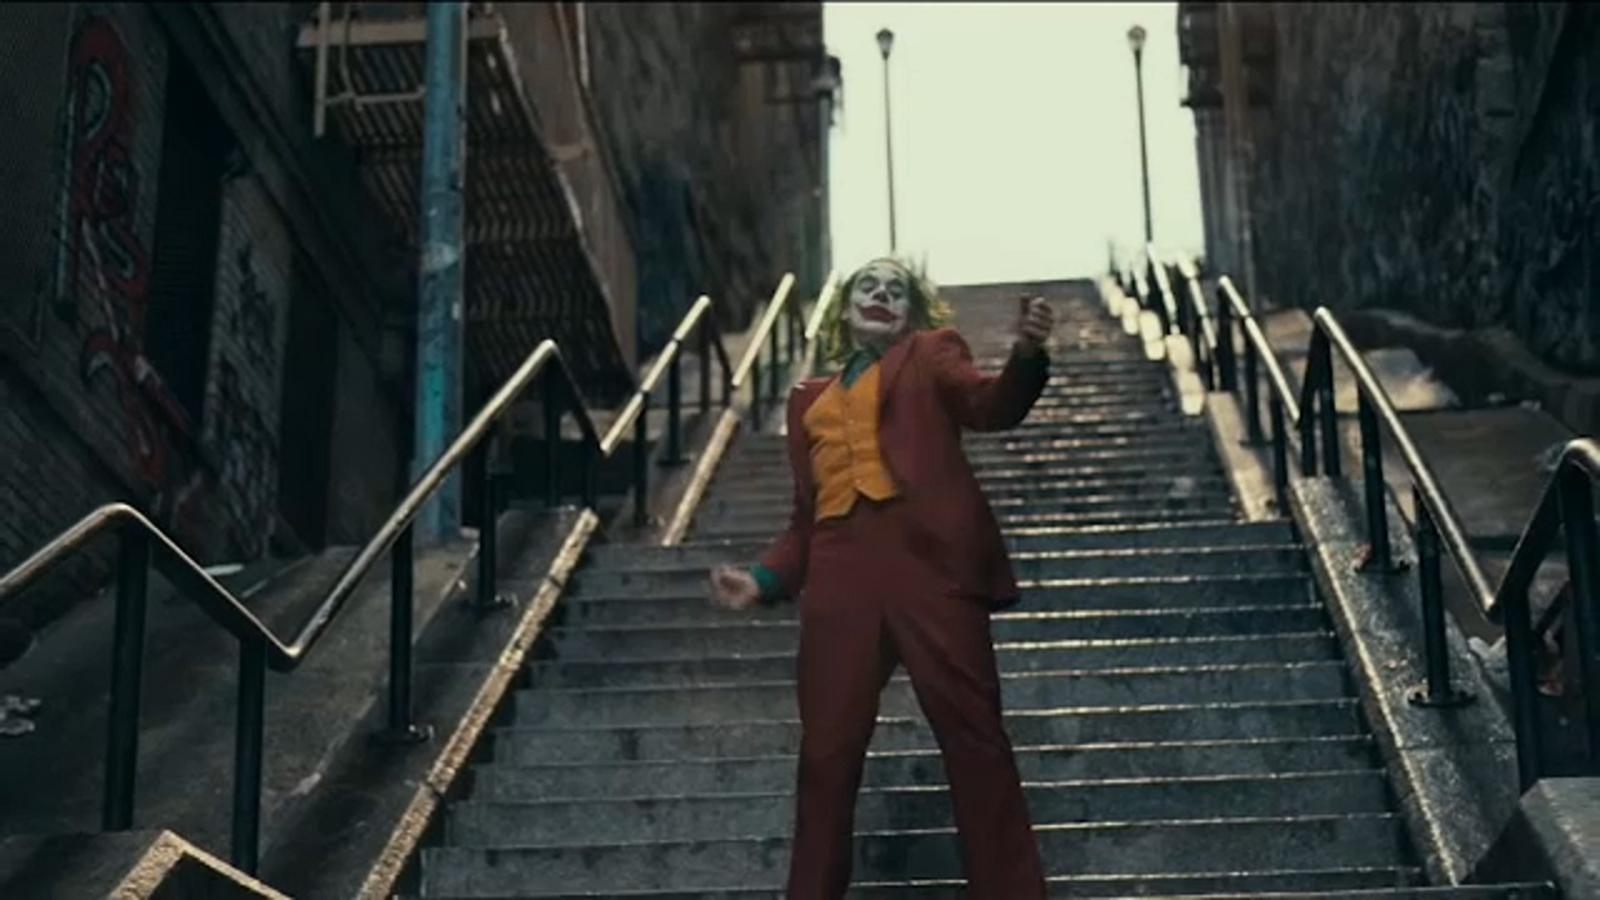 Fans flock to the 'Joker' stairs in the Bronx for perfect Instagram picture